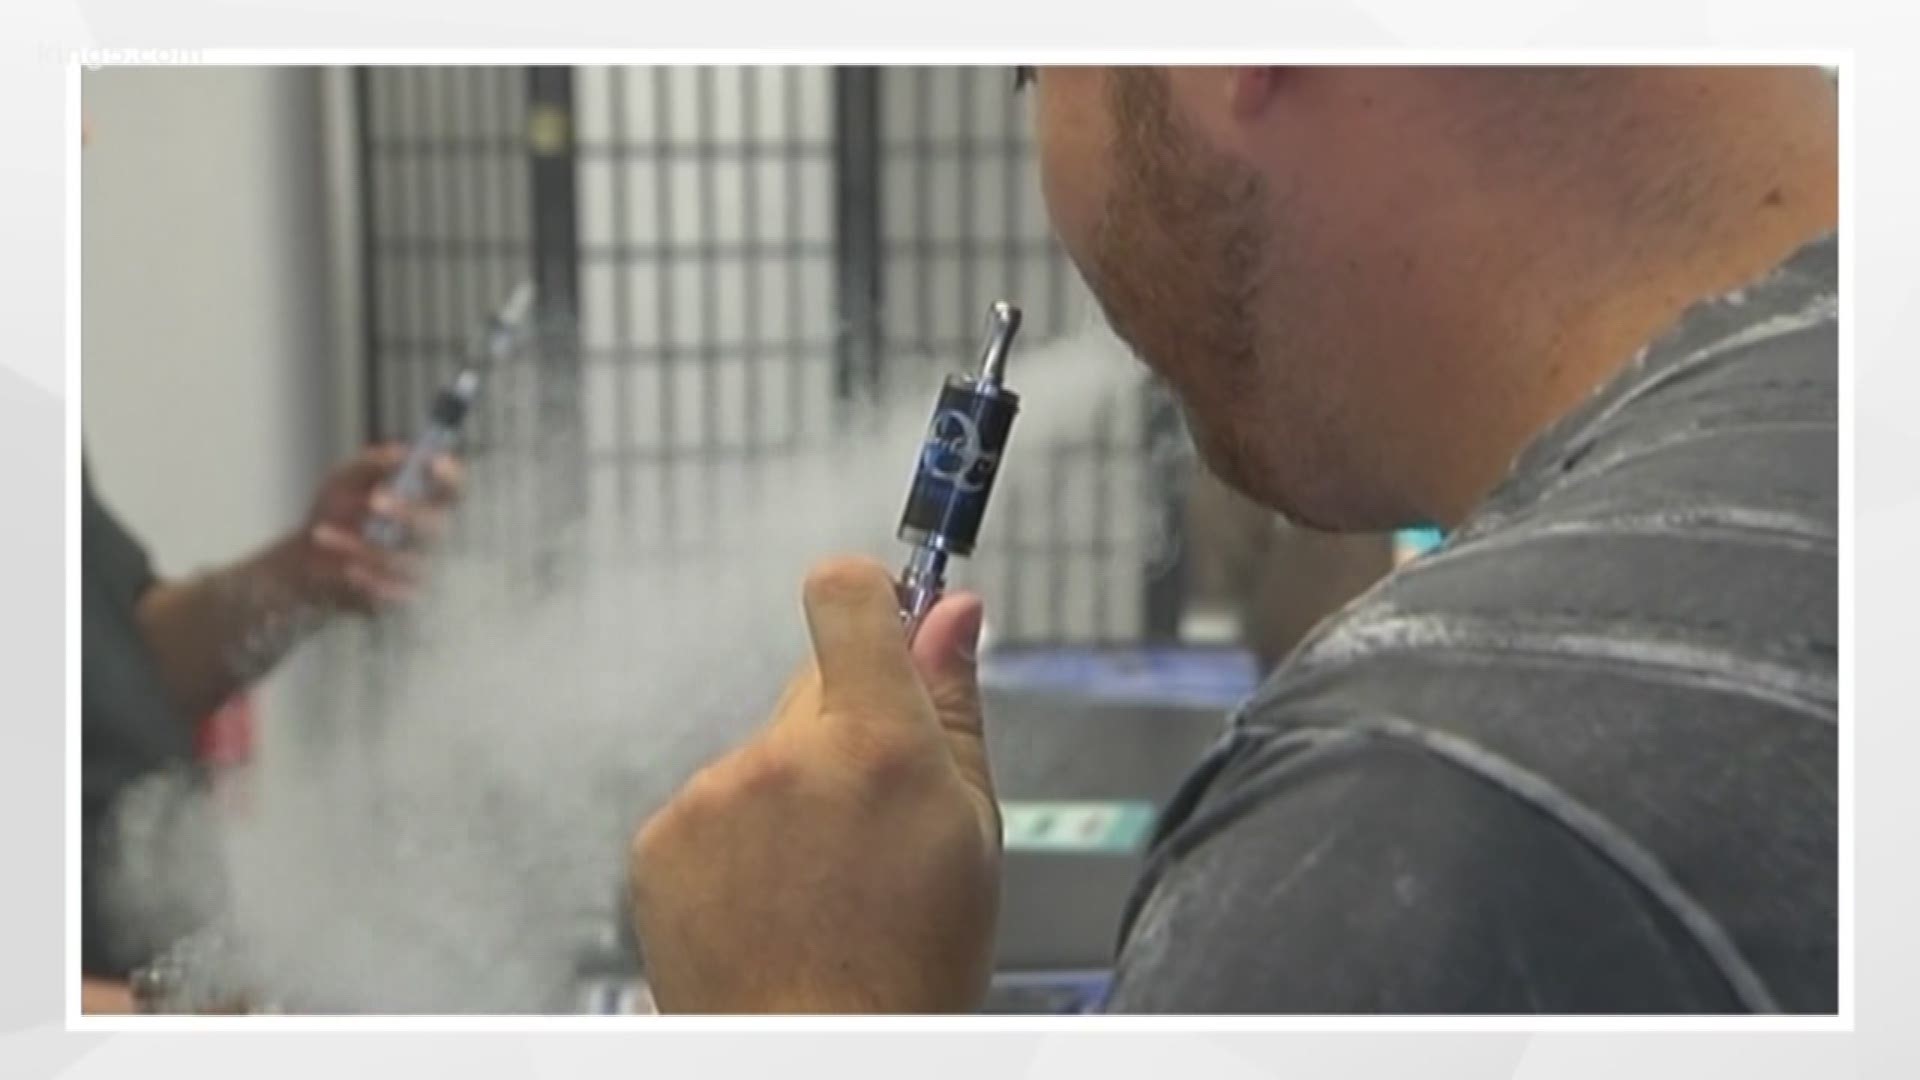 While physicians have always said that e-cigarette use is not safe, they are starting to see concrete evidence of the magnitude of the danger.